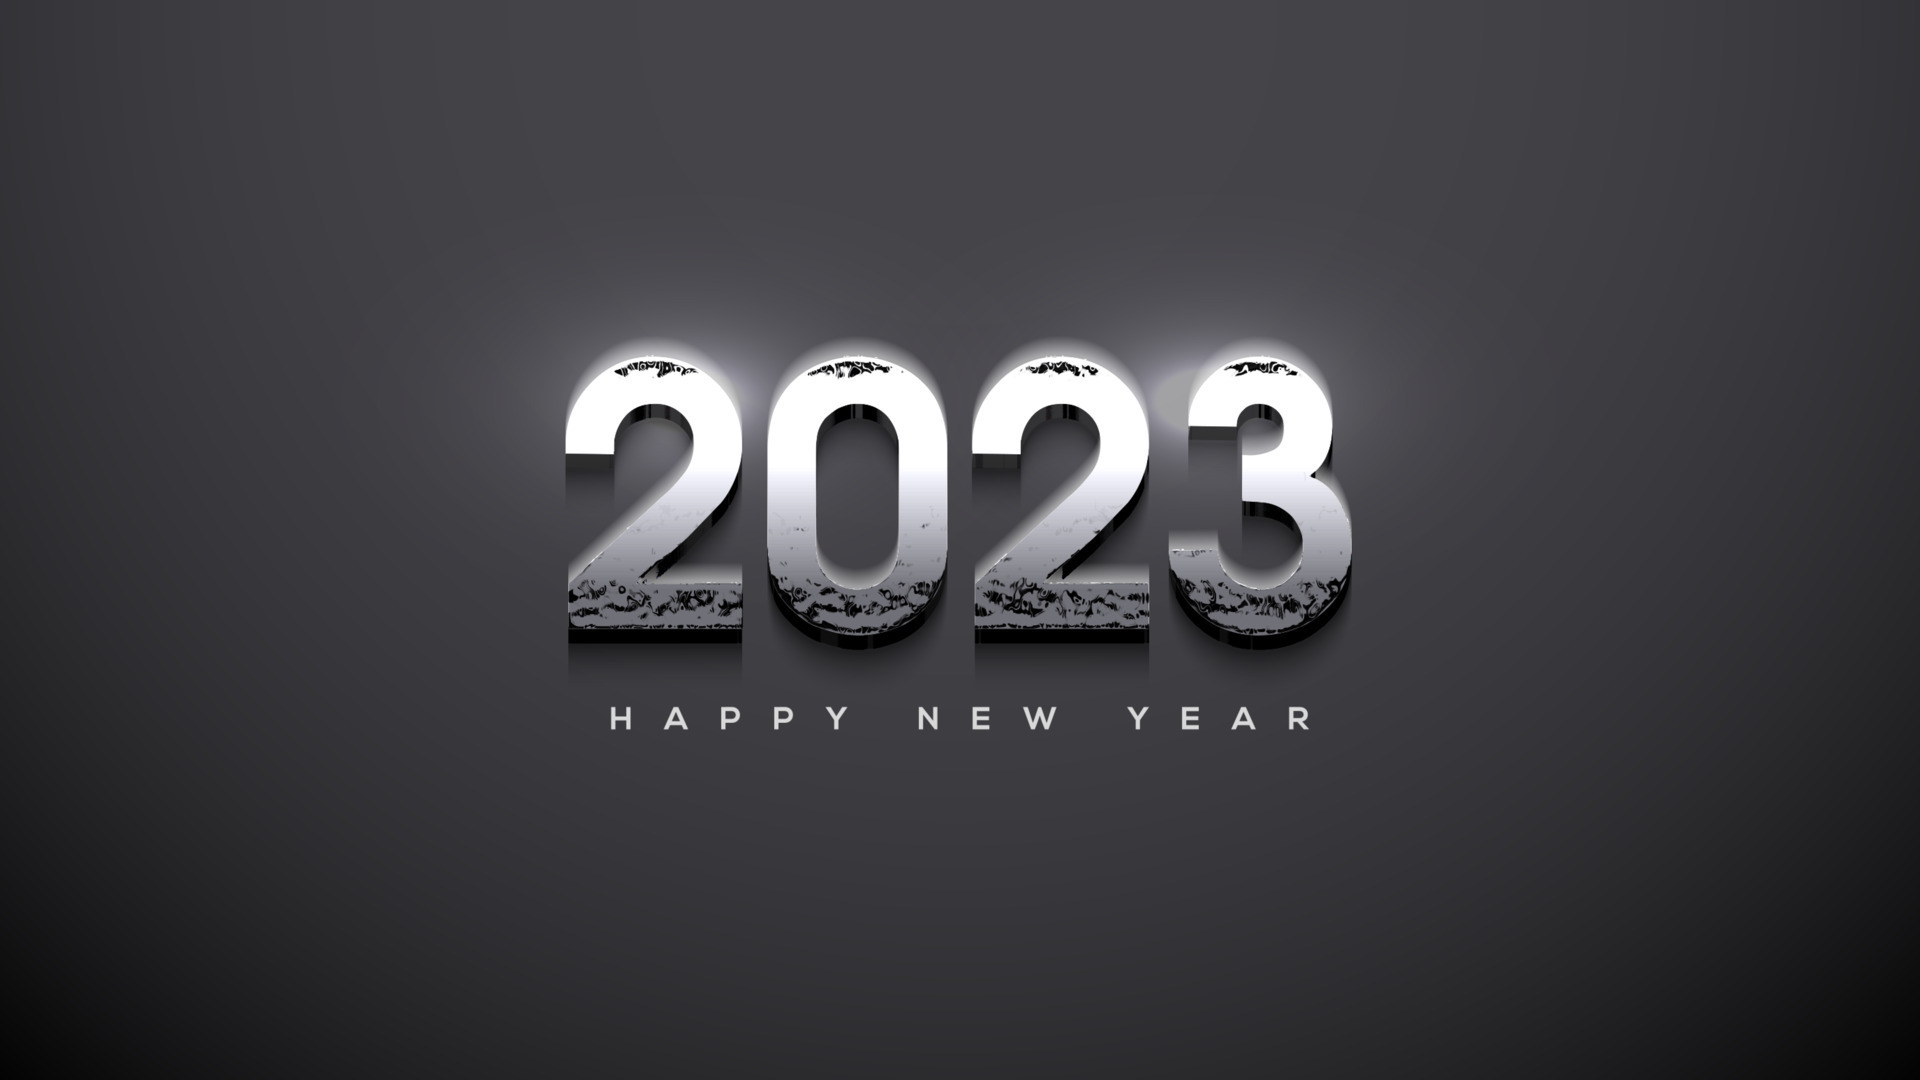 Happy new year 2023 with glowing silver metallic numbers on black background